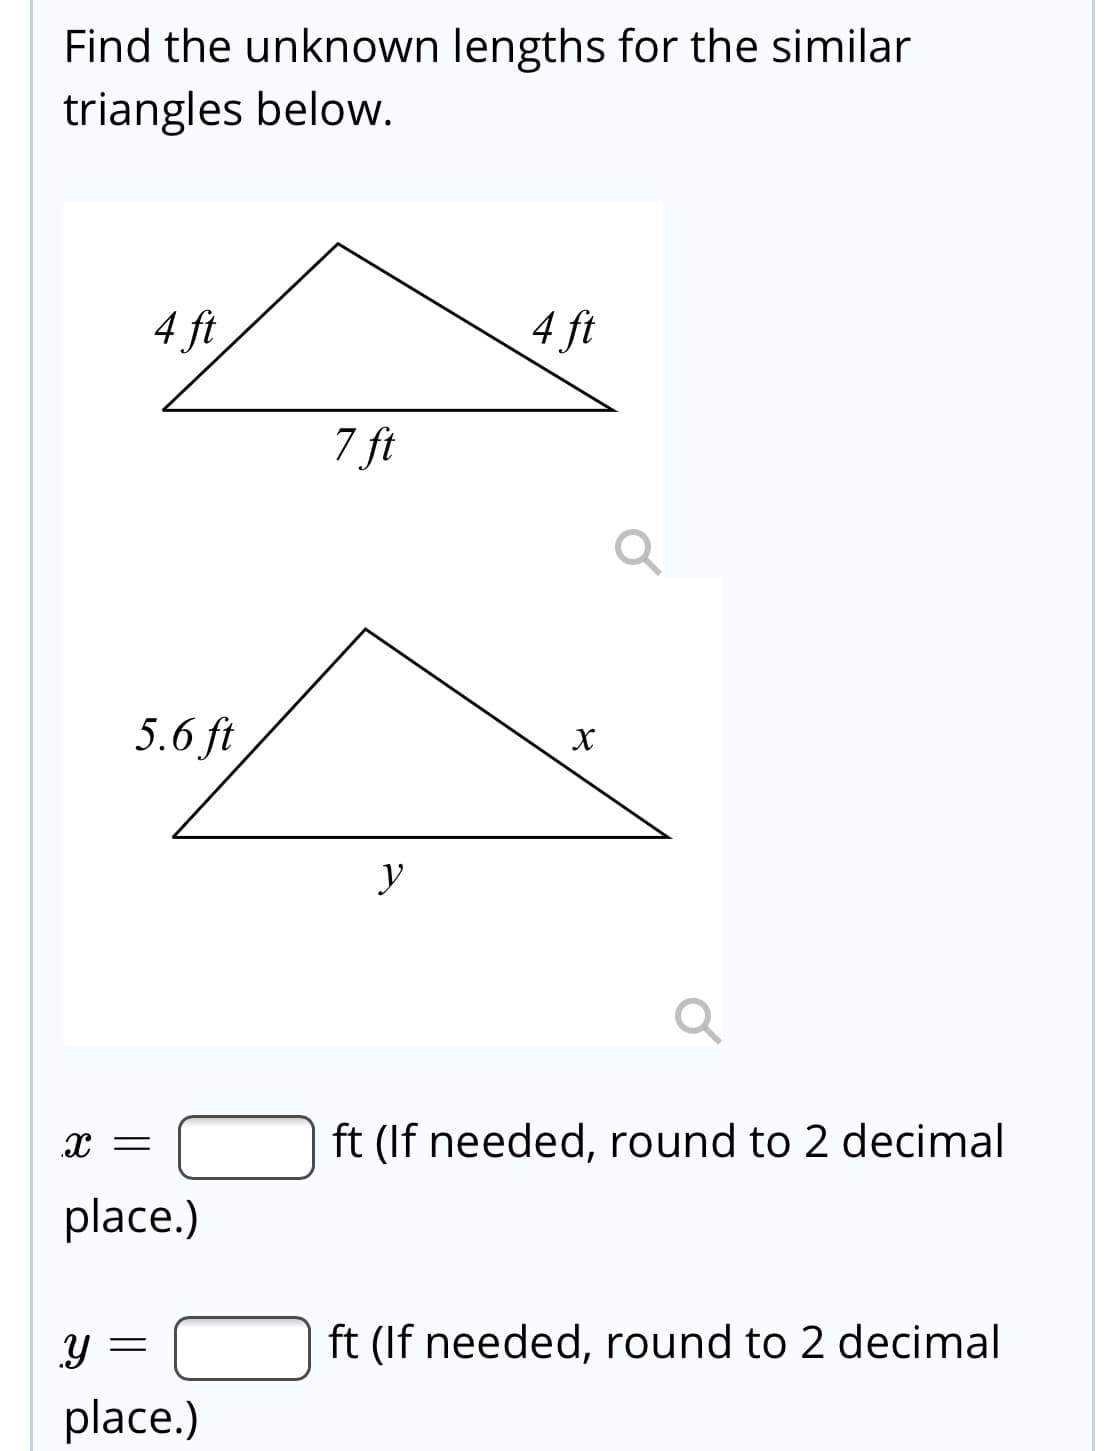 Find the unknown lengths for the similar
triangles below.
4 ft
4 ft
7 ft
5.6 ft
X
y
X =
ft (If needed, round to 2 decimal
place.)
ft (If needed, round to 2 decimal
place.)
